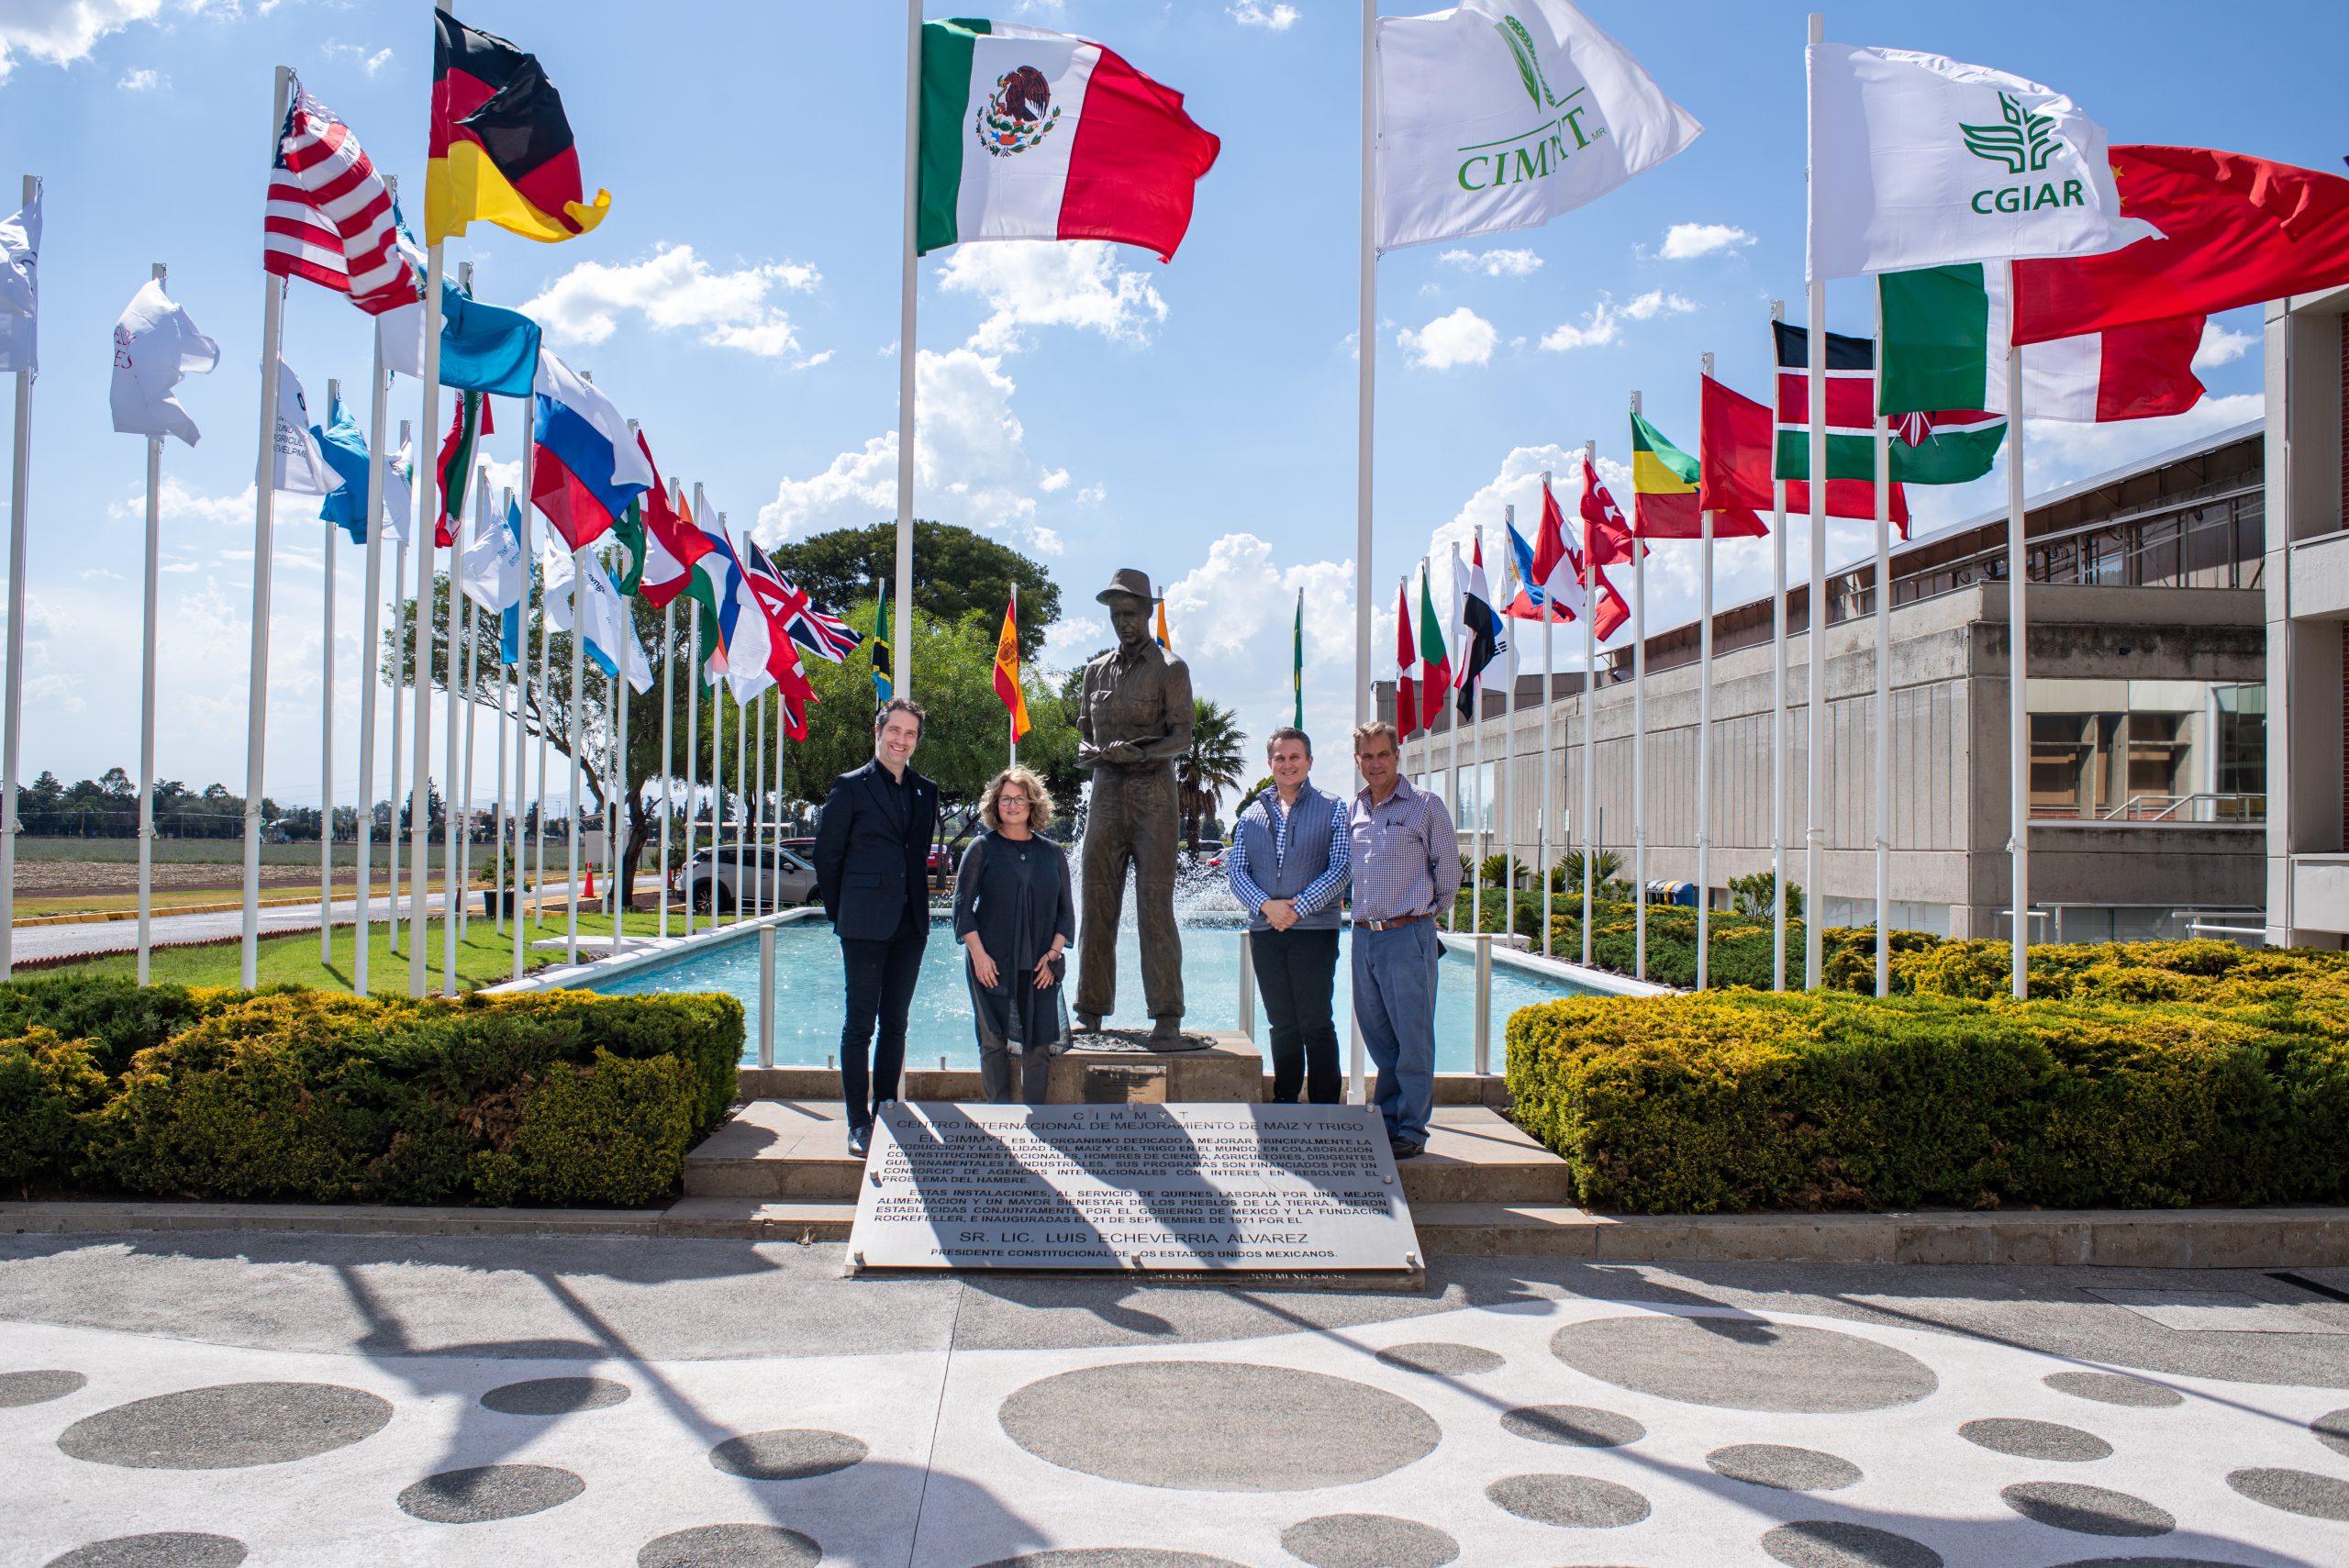 (Left to right) Bram Govaerts, Claudia Sadoff, Joaquín Lozano and Kevin Pixley stand for a group photo next to the Norman Borlaug sculpture at CIMMYT’s global headquarters in Texcoco, Mexico. (Photo: Alfonso Cortés/CIMMYT)